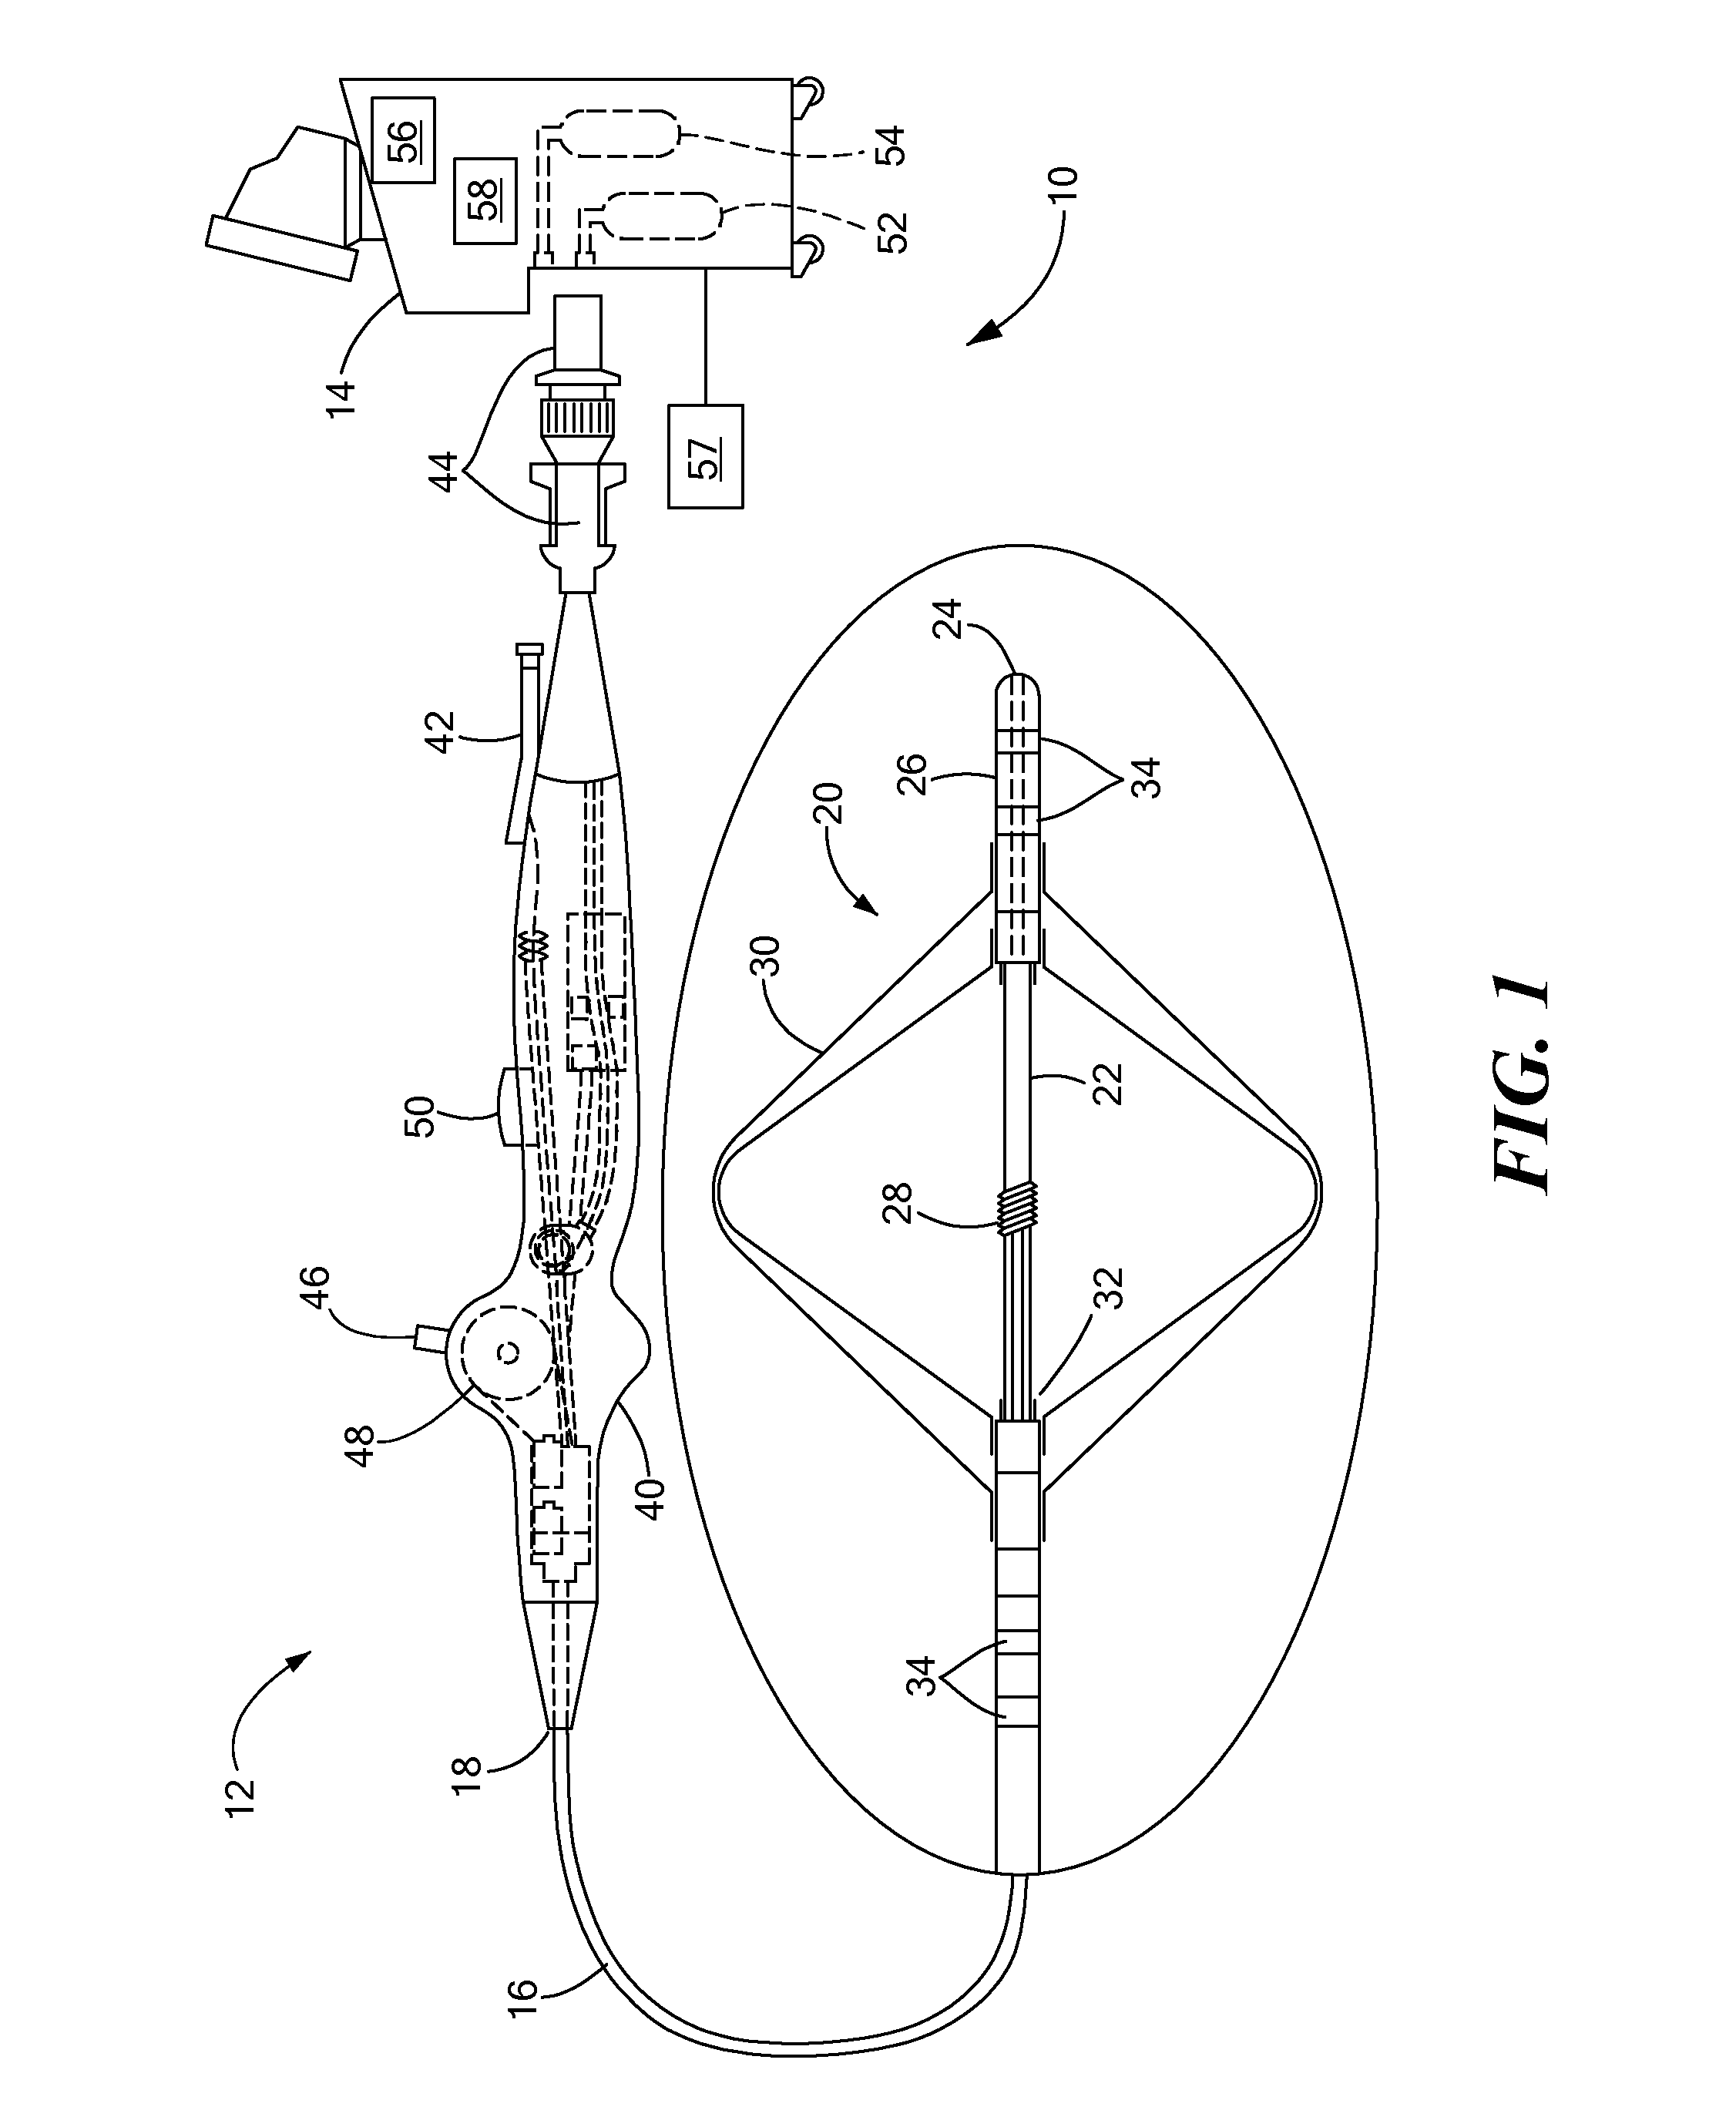 Impedance detection of venous placement of multi-electrode catheters